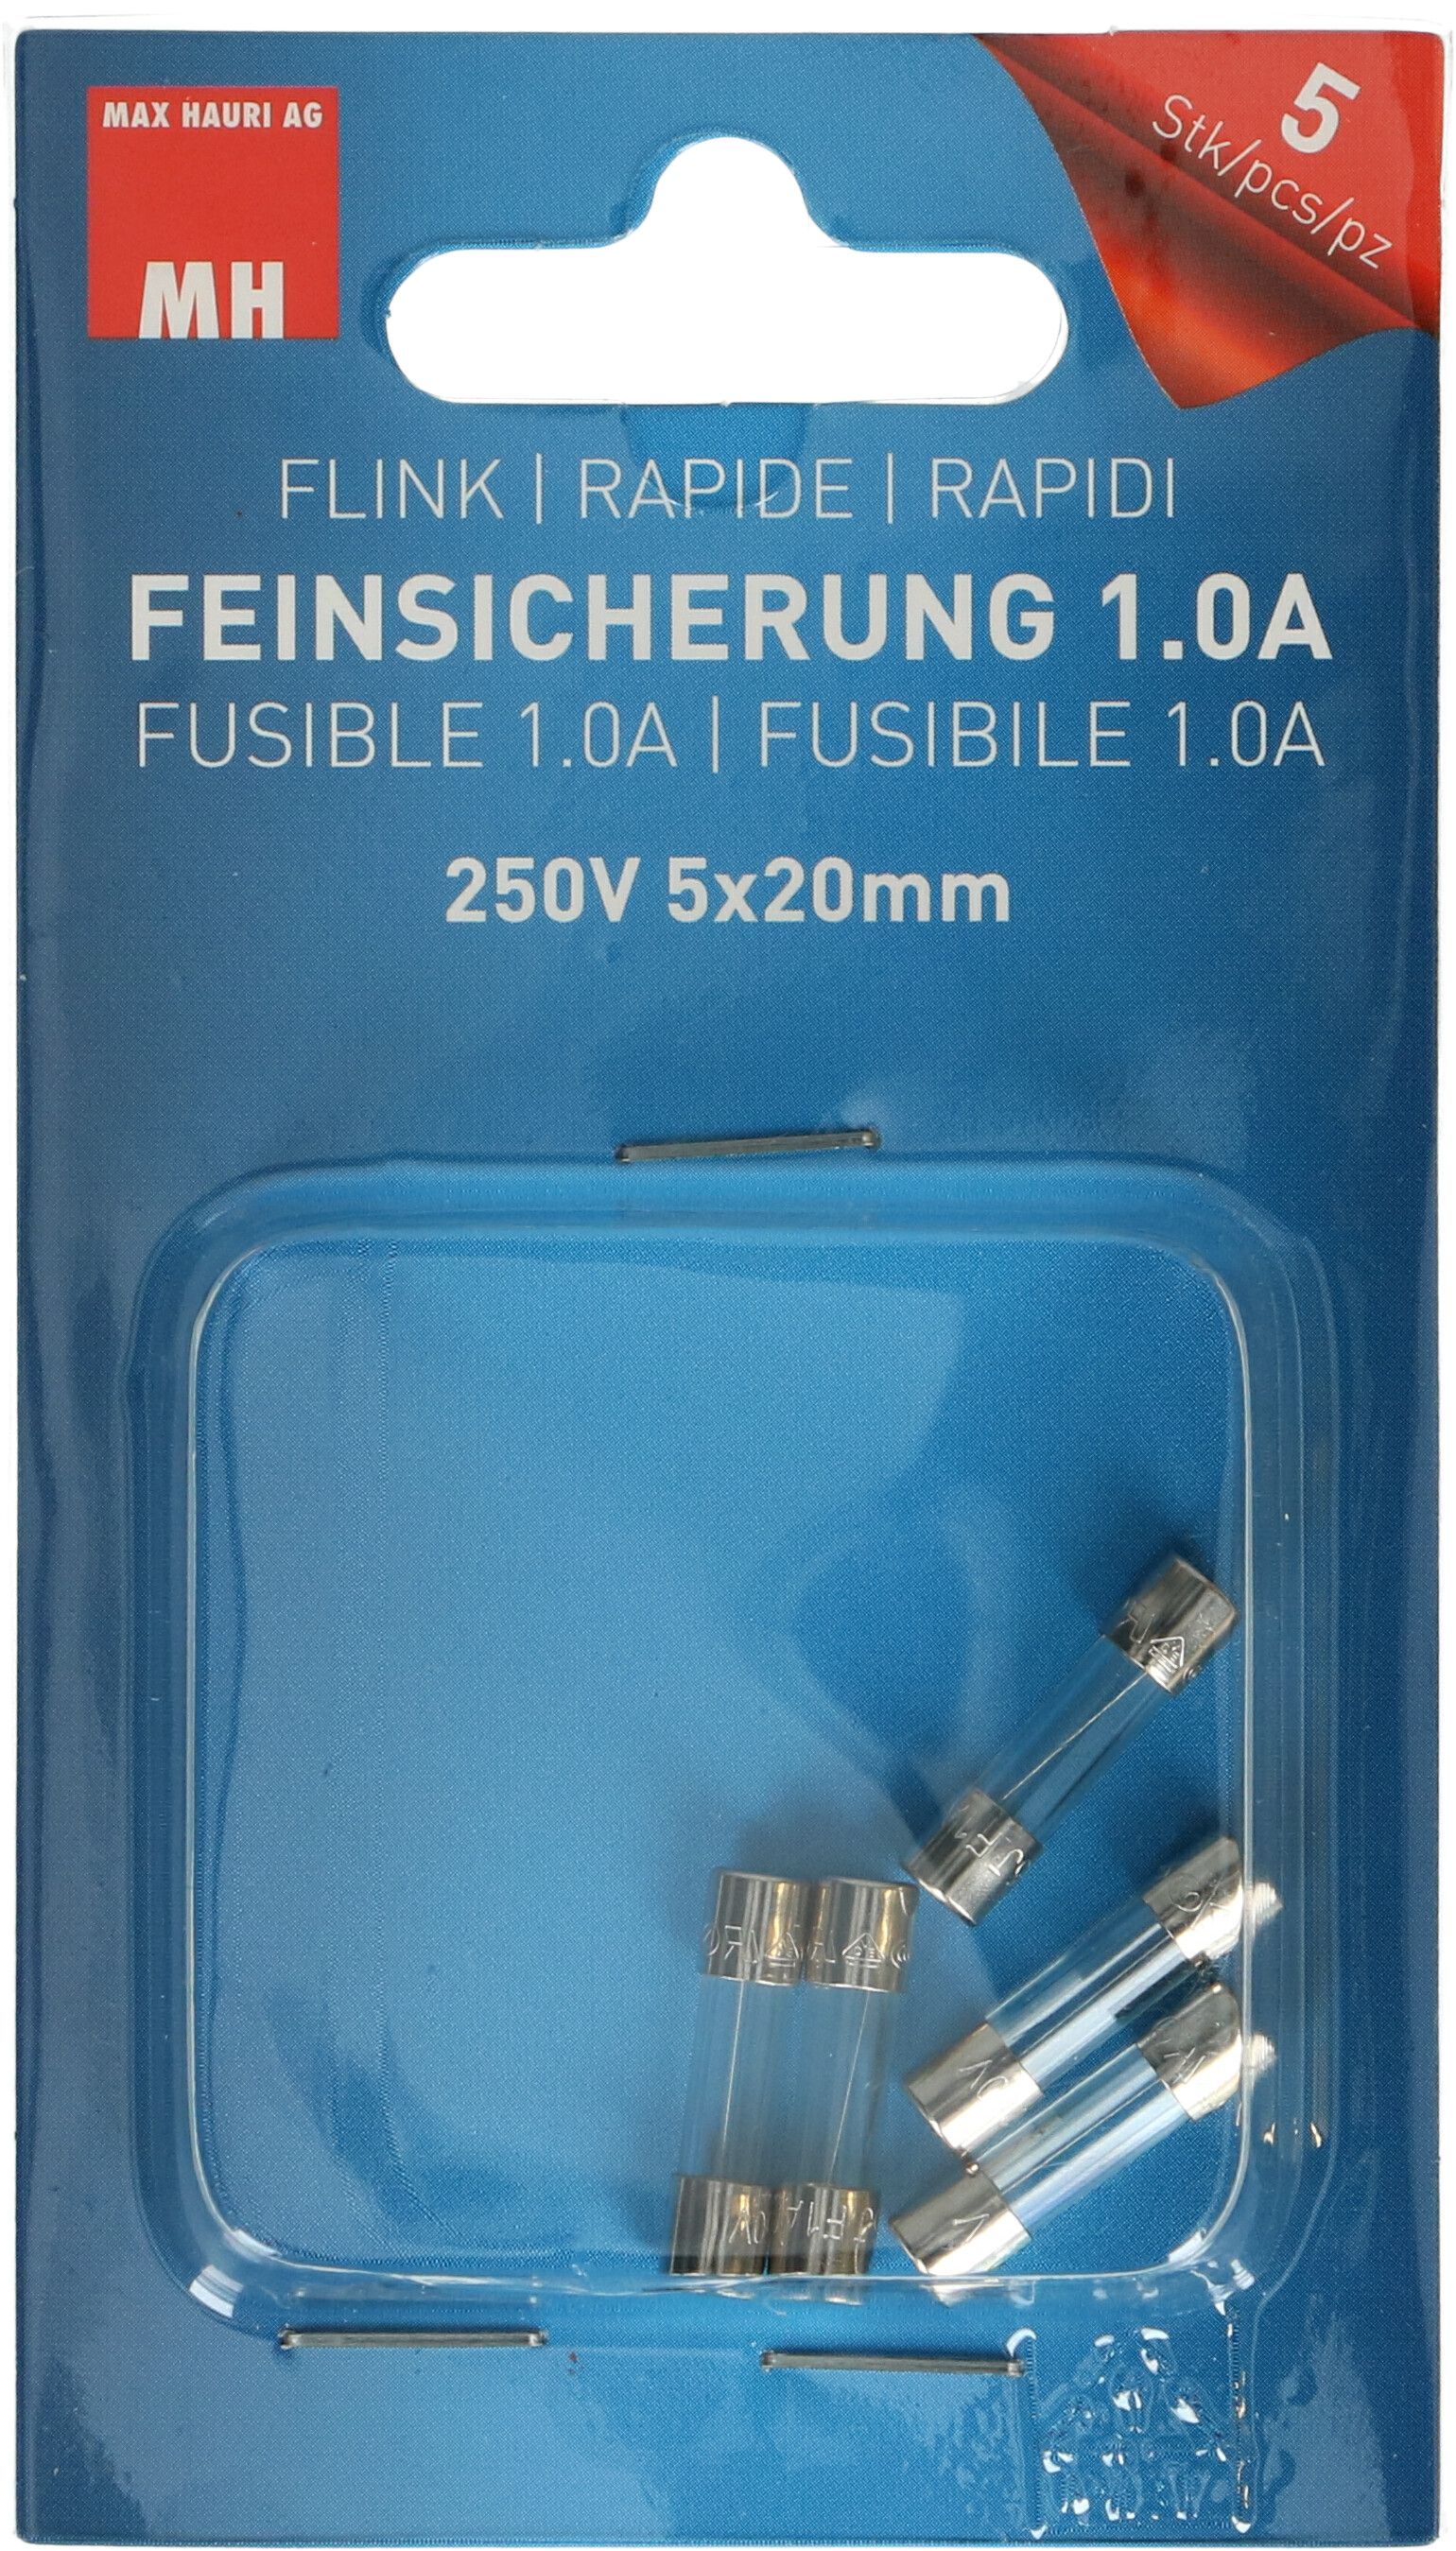 Fuse 5x20mm fast-acting 1.0A / 250V